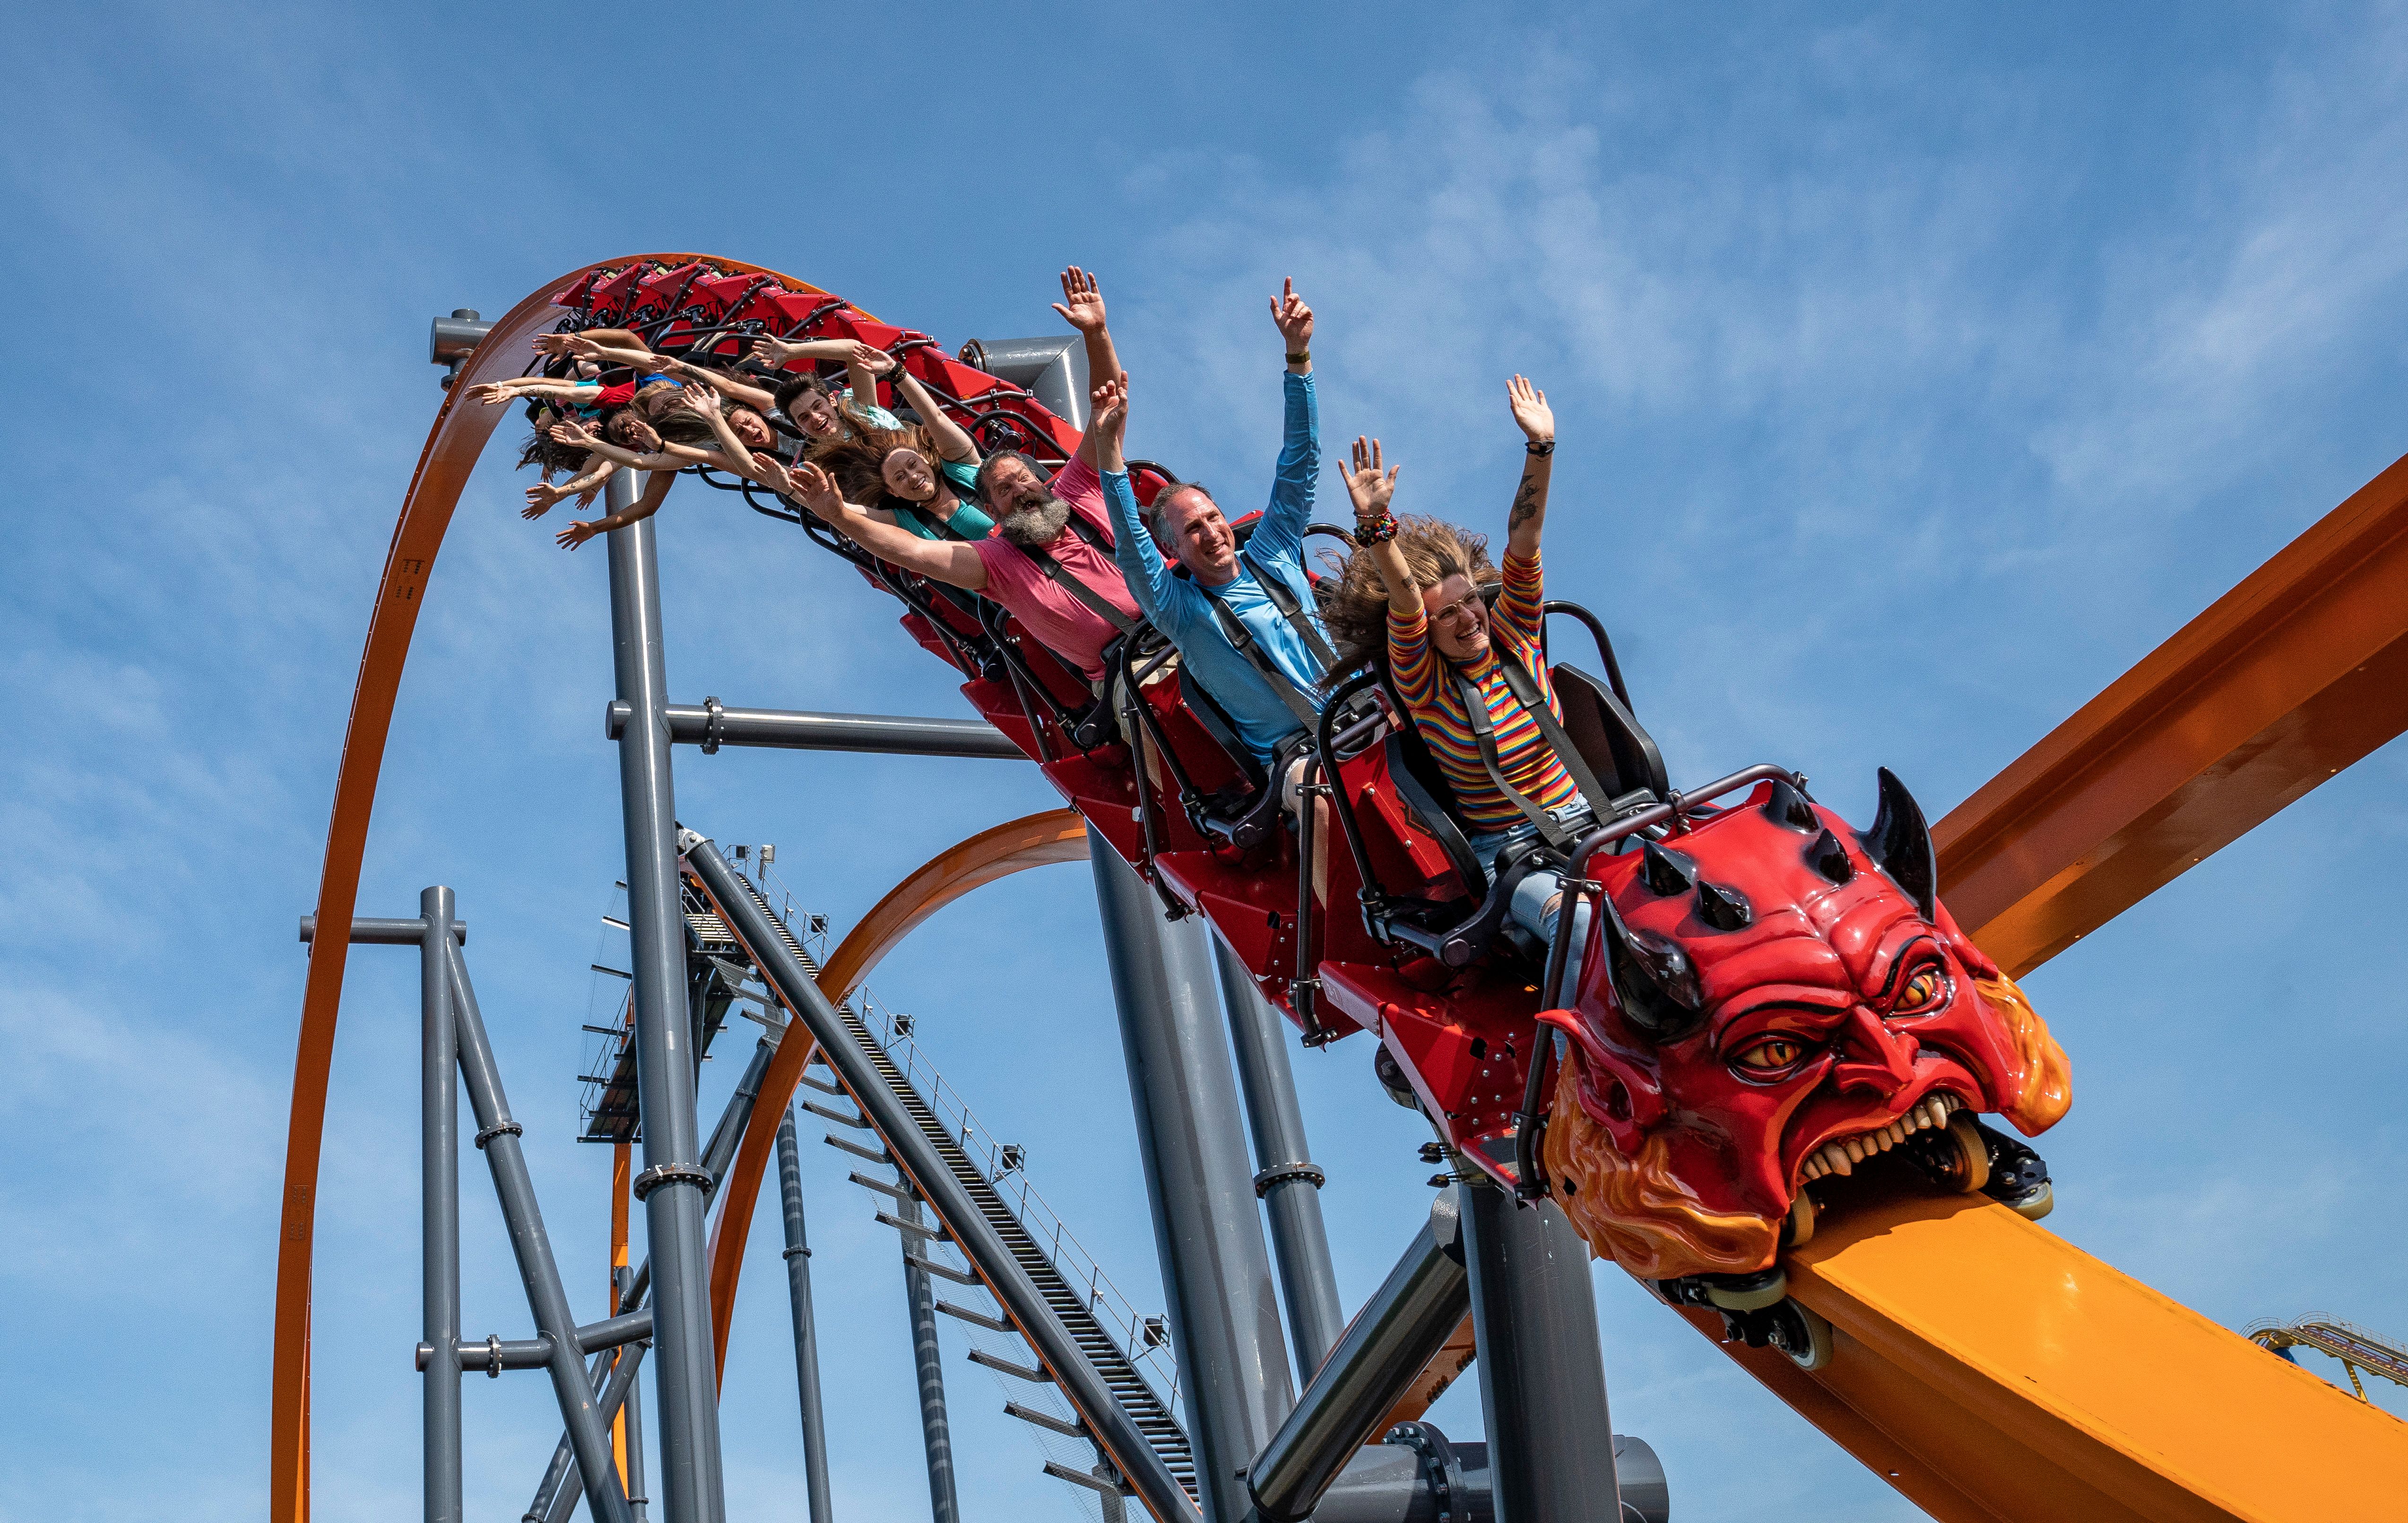 Theme Parks in California Are Reopening: What to Know About